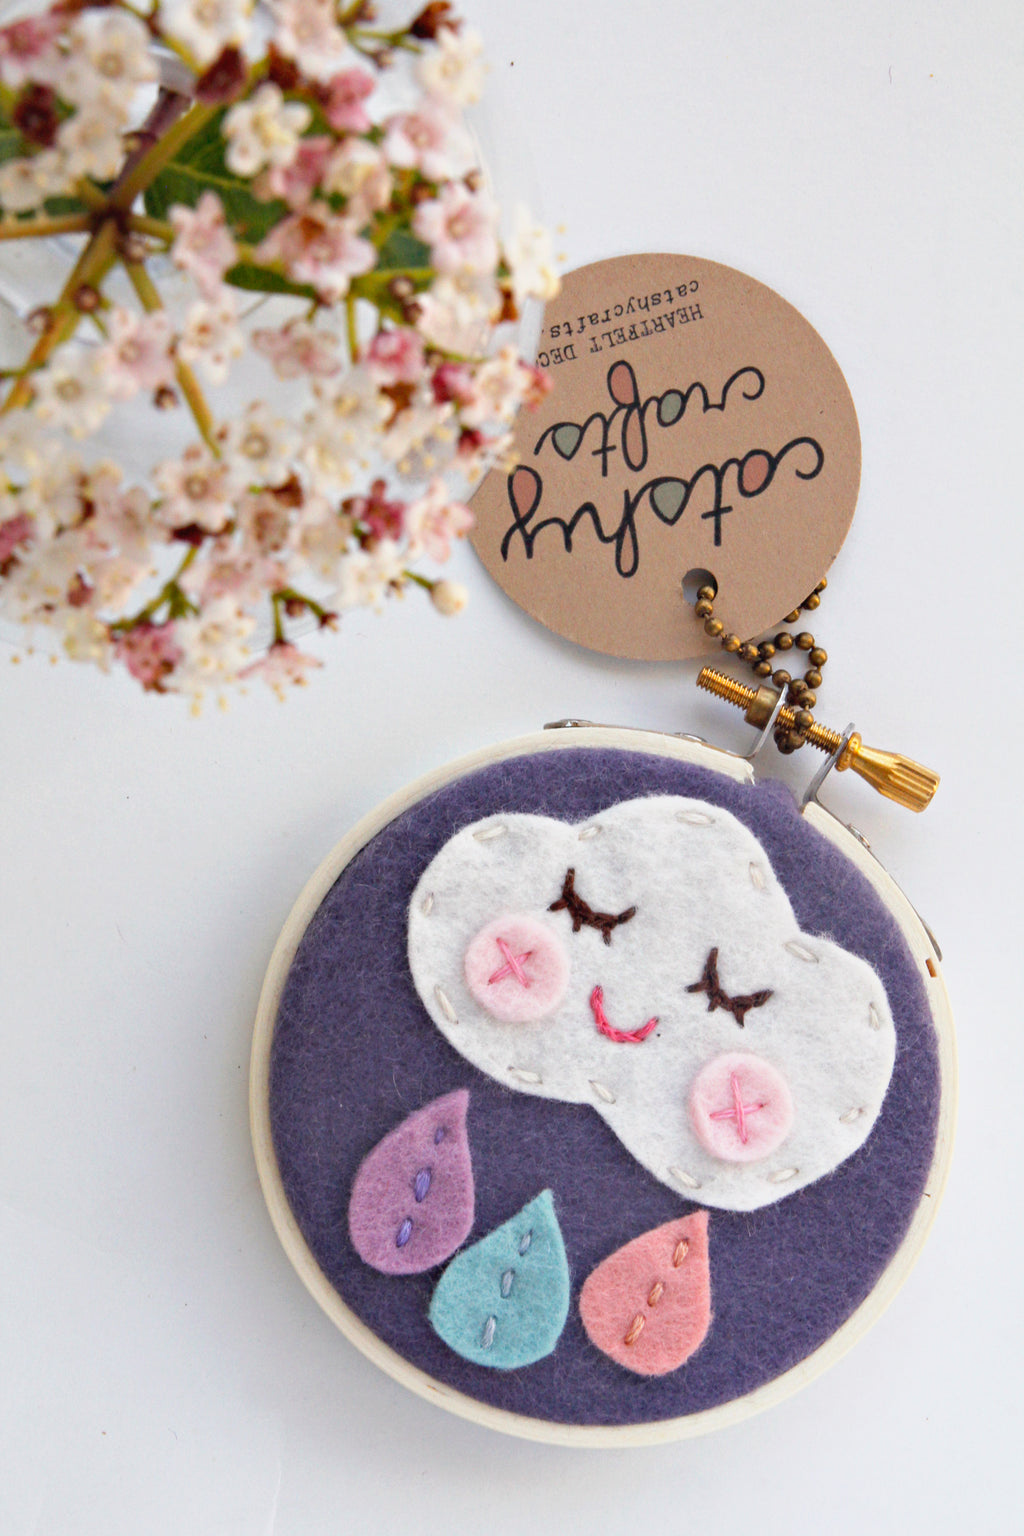 Embroidery Hoop, Couple's Wooden Frame with Embroidery Hoops, Lovers H –  Magical Kart